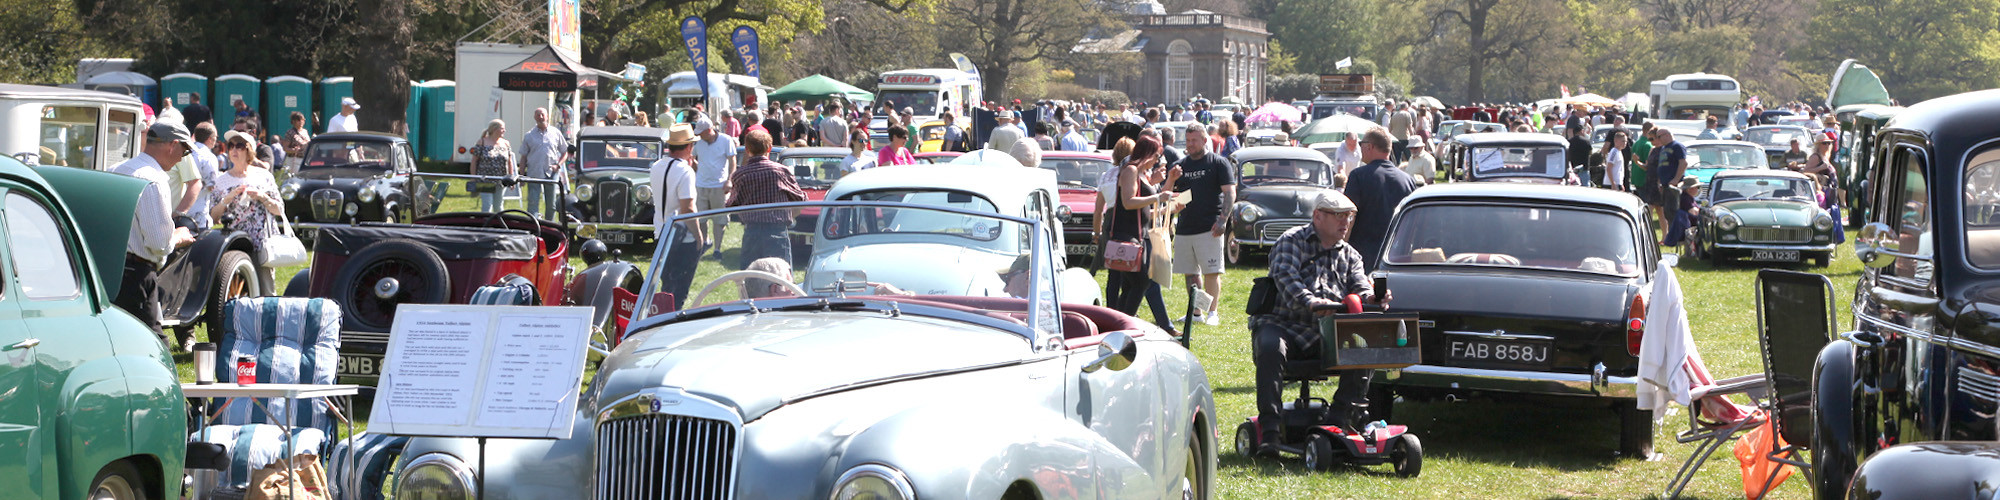 Easter Activities Near Me 2020
 The Easter Motor Show Sun 12 & Mon 13 April 2020